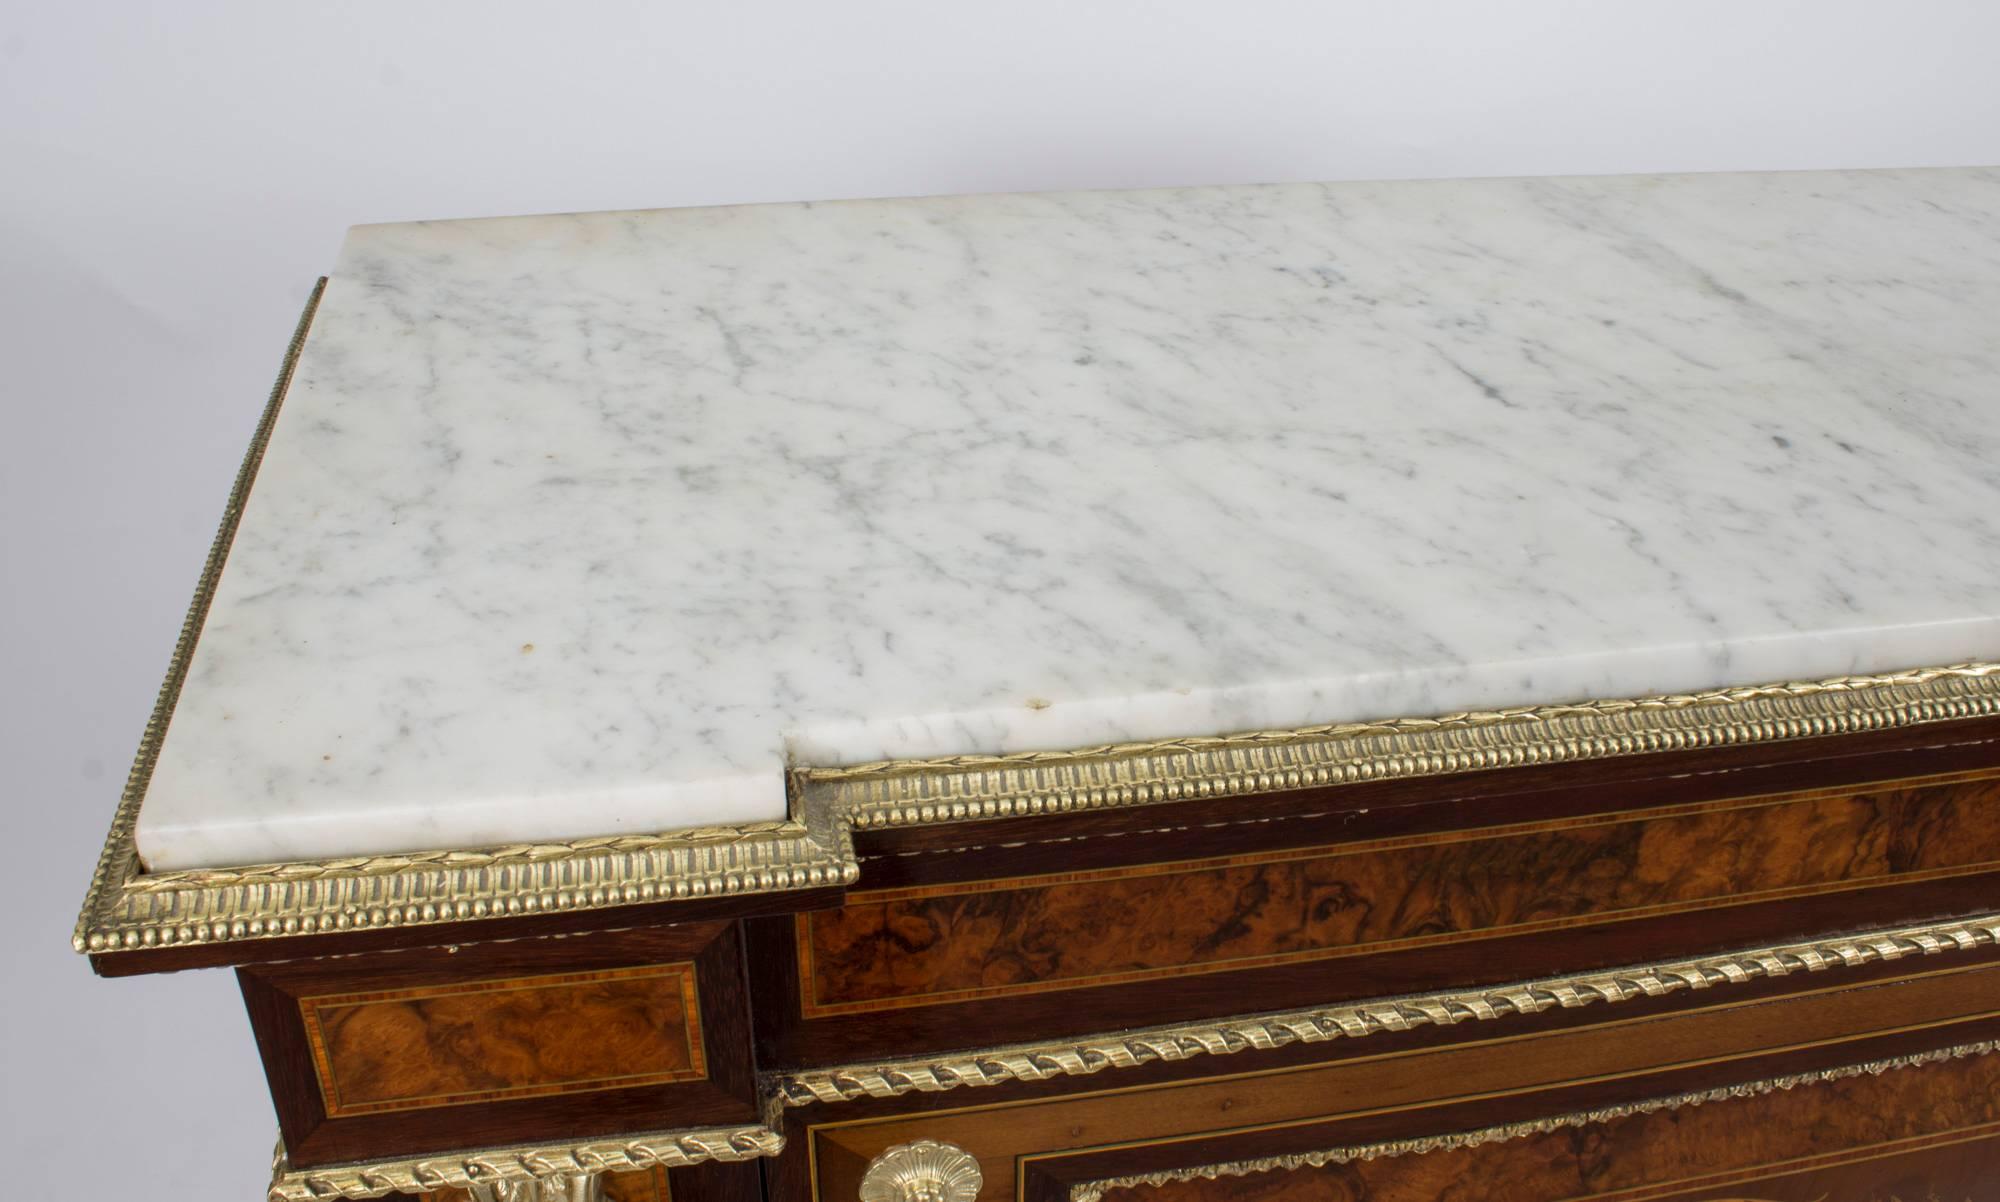 This is a beautiful antique French Napoleon III burr walnut and ormolu-mounted marquetry side cabinet, with a beautiful Carrara marble top, in the grand Louis XV style, circa 1860 in date.

It is made of burr walnut and mahogany with a beautiful